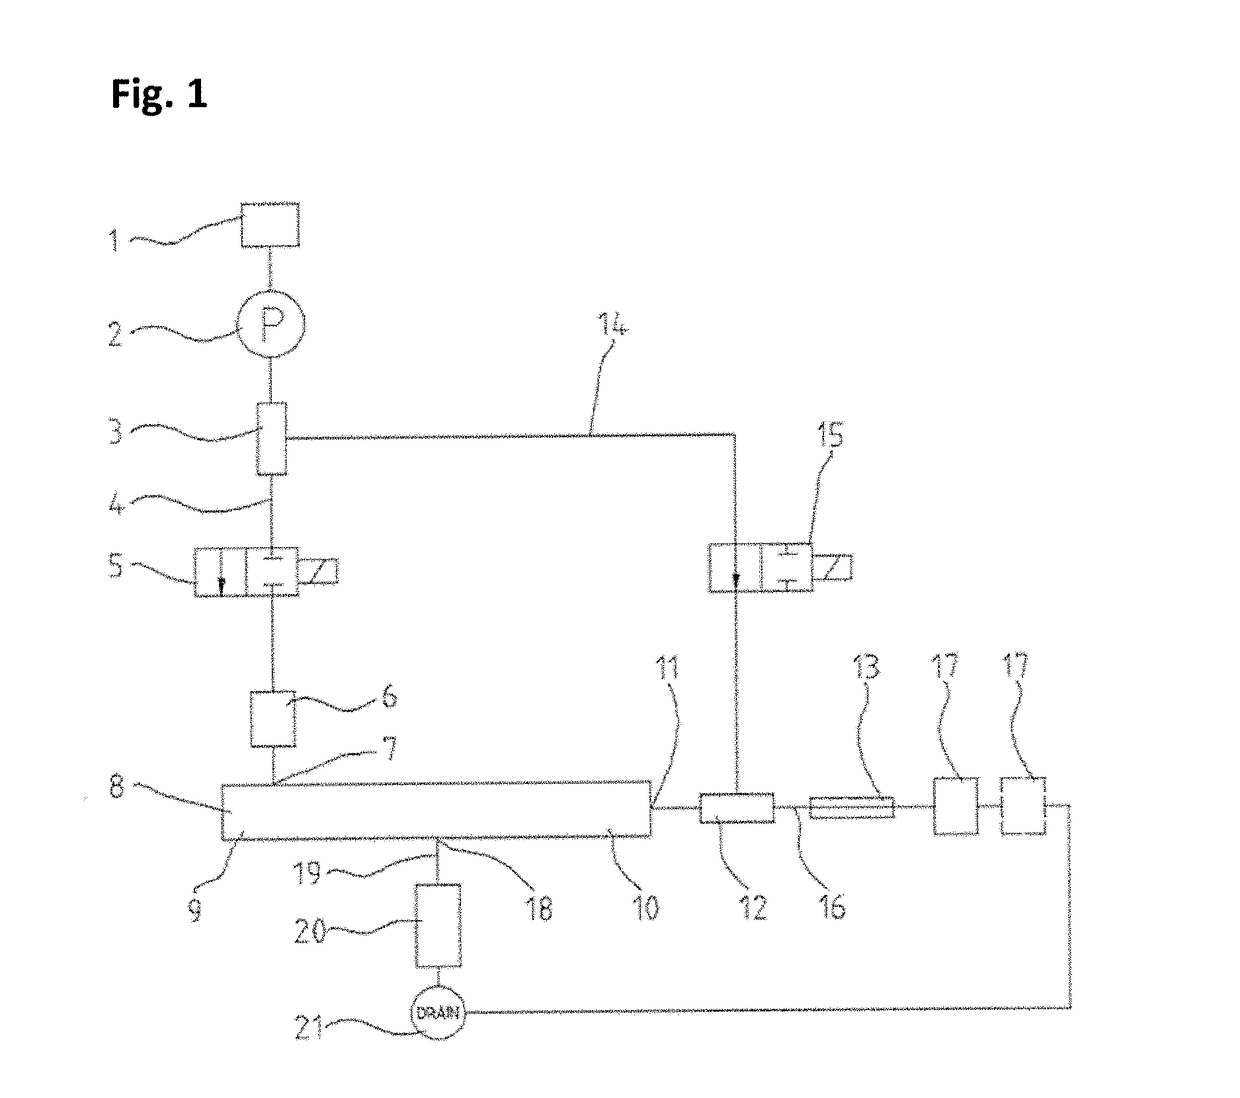 Apparatus for field-flow fractionation